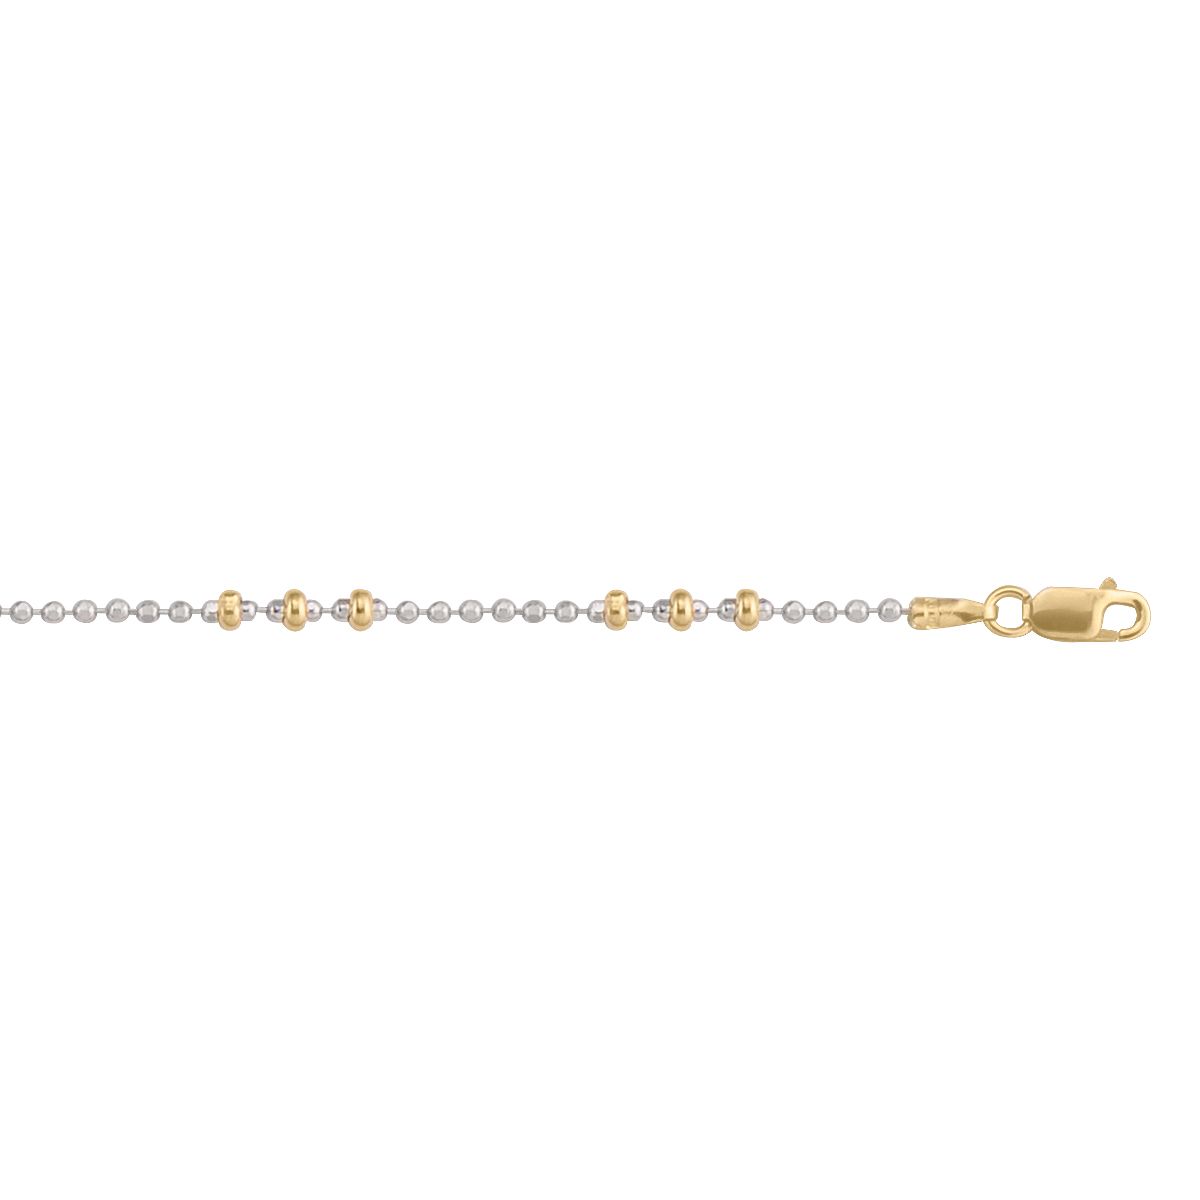 ABD03D-WY, Gold Fancy Bead Anklet  - 2.7 mm White and Yellow Gold